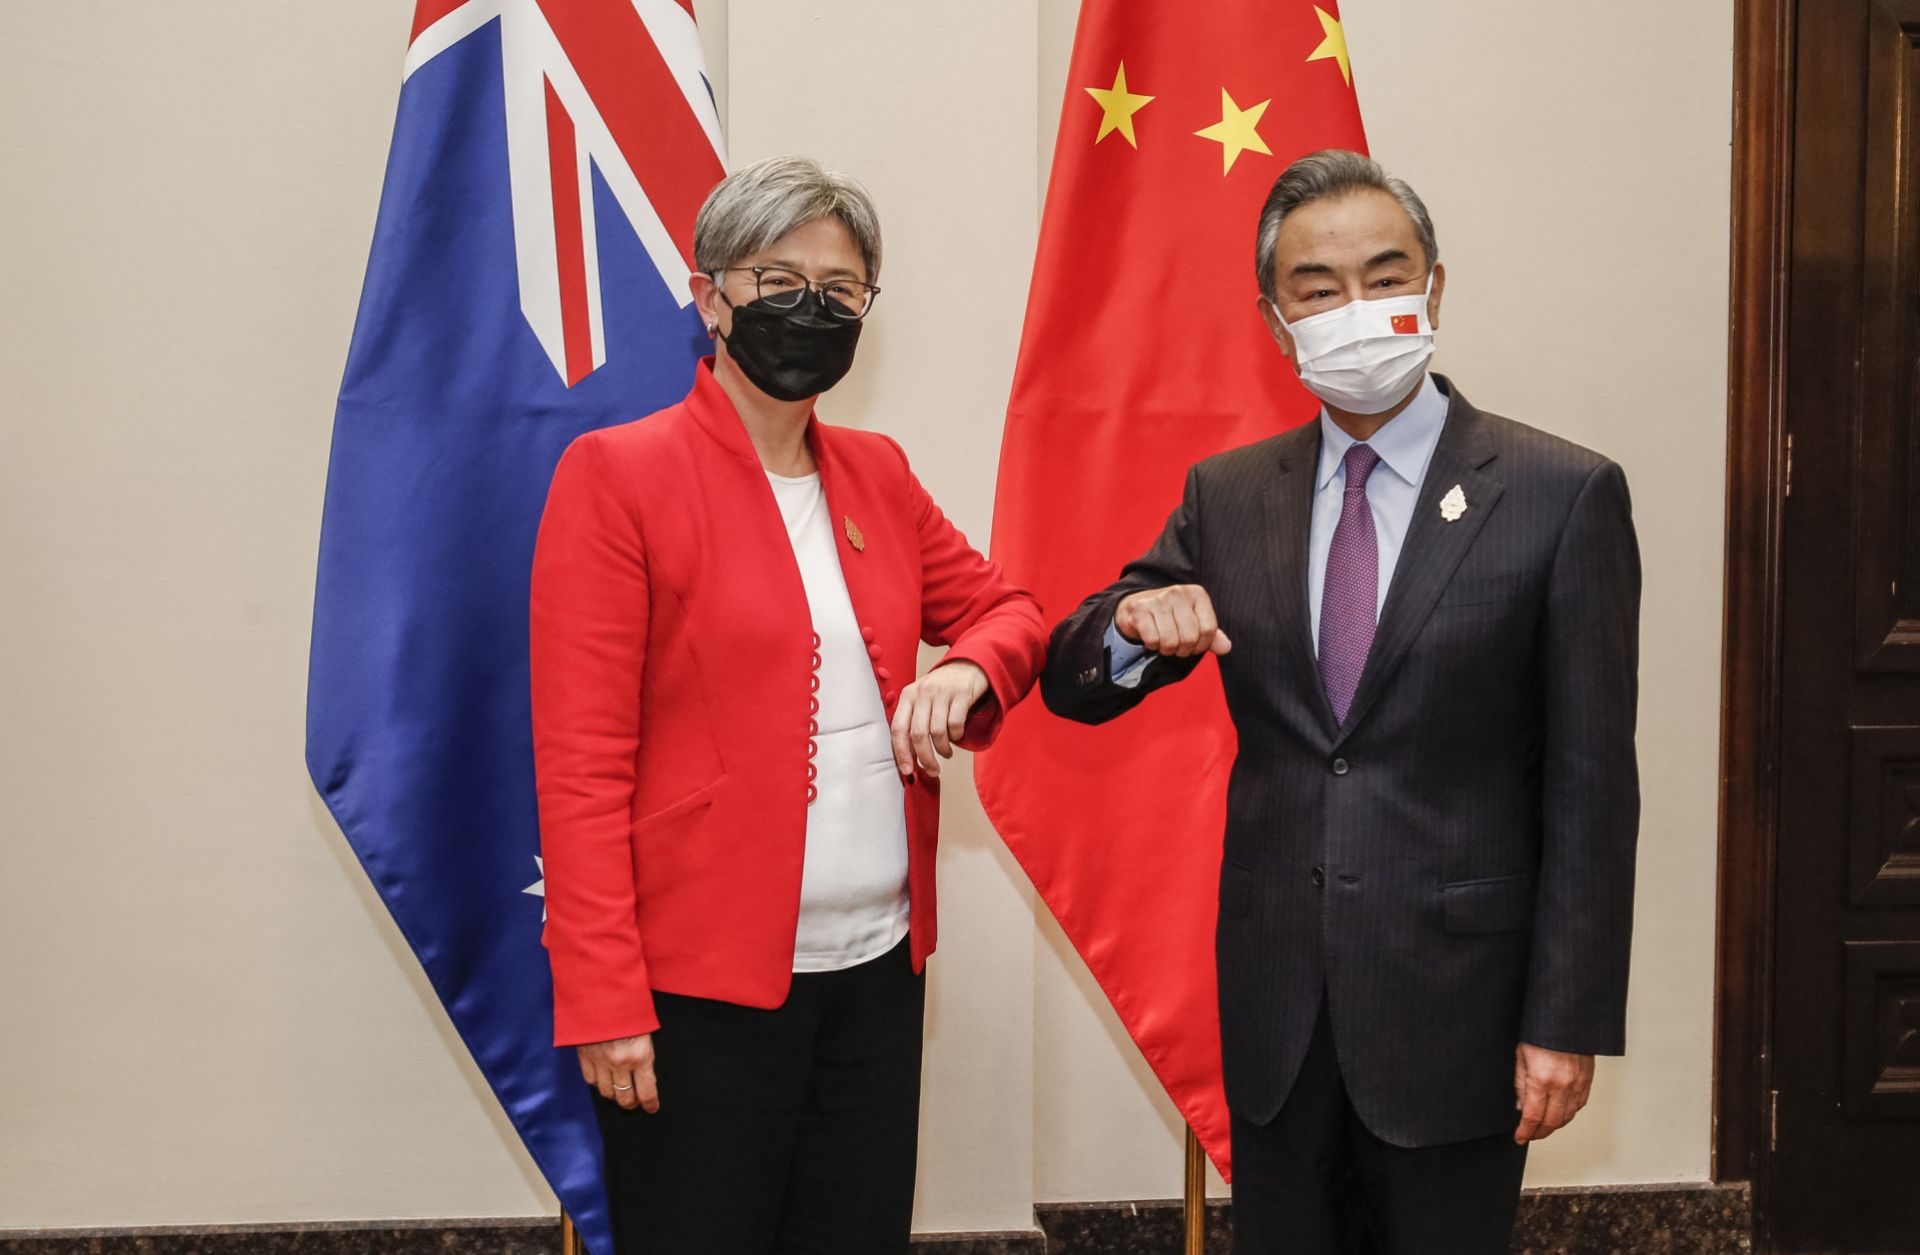 Australian Foreign Minister Penny Wong (left) bumps elbows with her Chinese counterpart Wang Yi on the sidelines of the G-20 Foreign Ministers Meeting in Bali, Indonesia, on July 8, 2022.